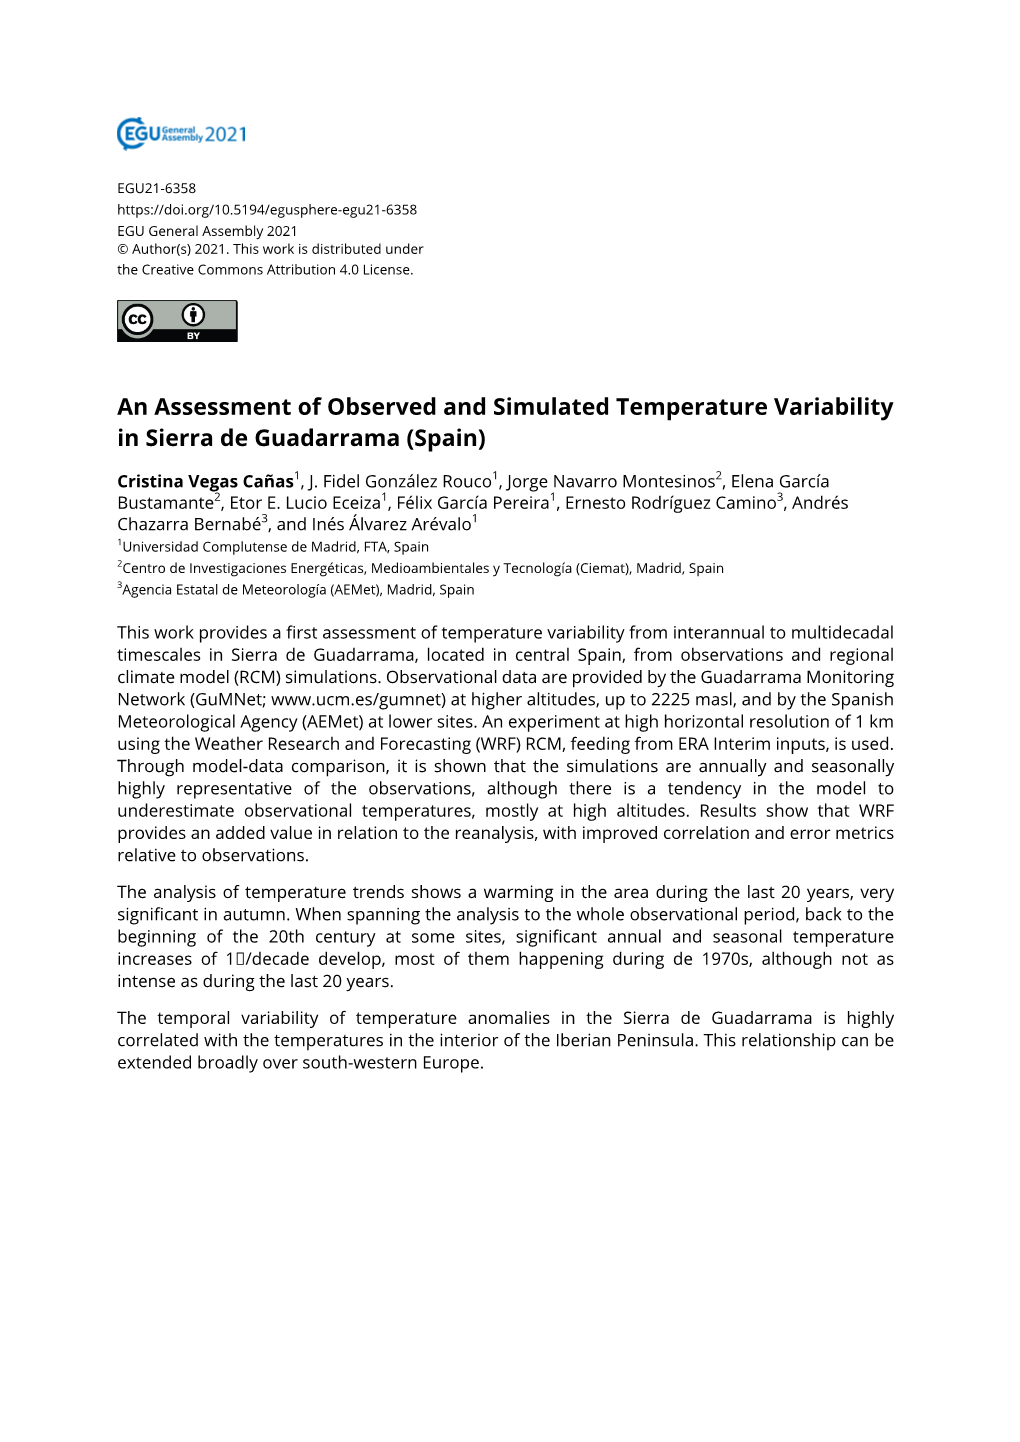 An Assessment of Observed and Simulated Temperature Variability in Sierra De Guadarrama (Spain)